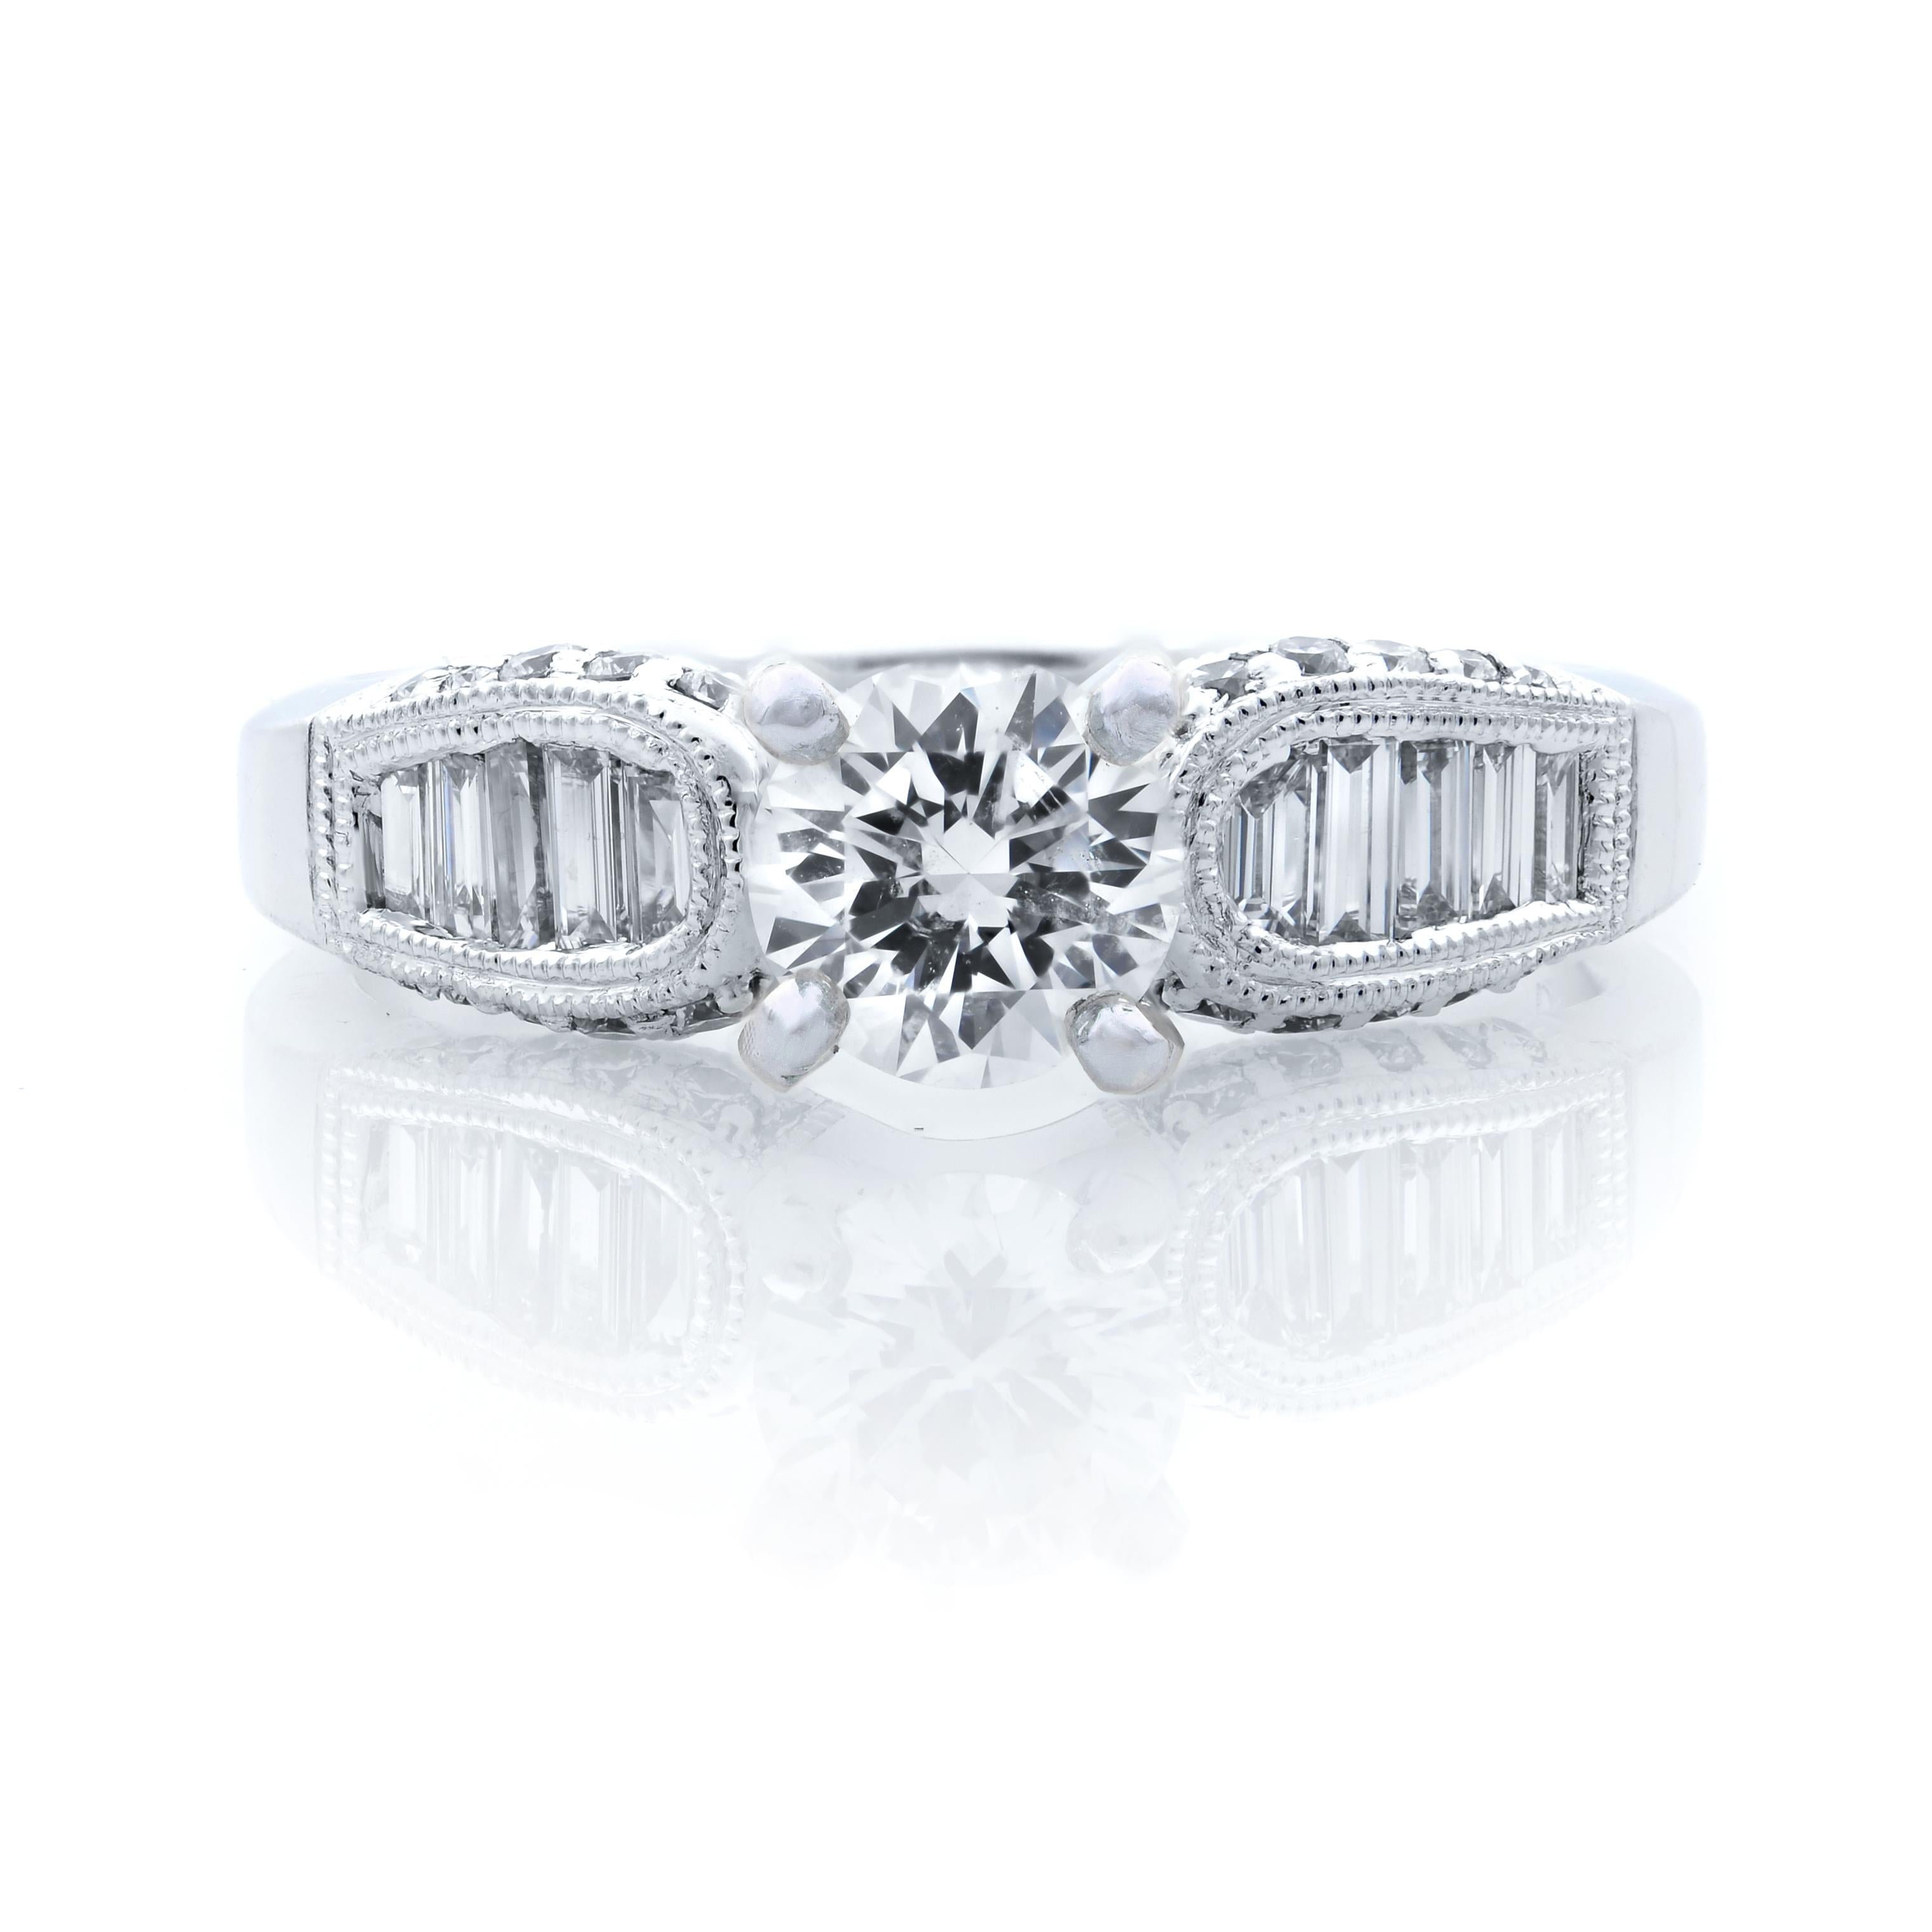 This unique and chic design, 18k white gold engagement ring is the perfect mounting to create an engagement ring, anniversary ring or fashion ring. The center features four prongs that can hold a 0.50 carat round-cut diamond accented with 0.43